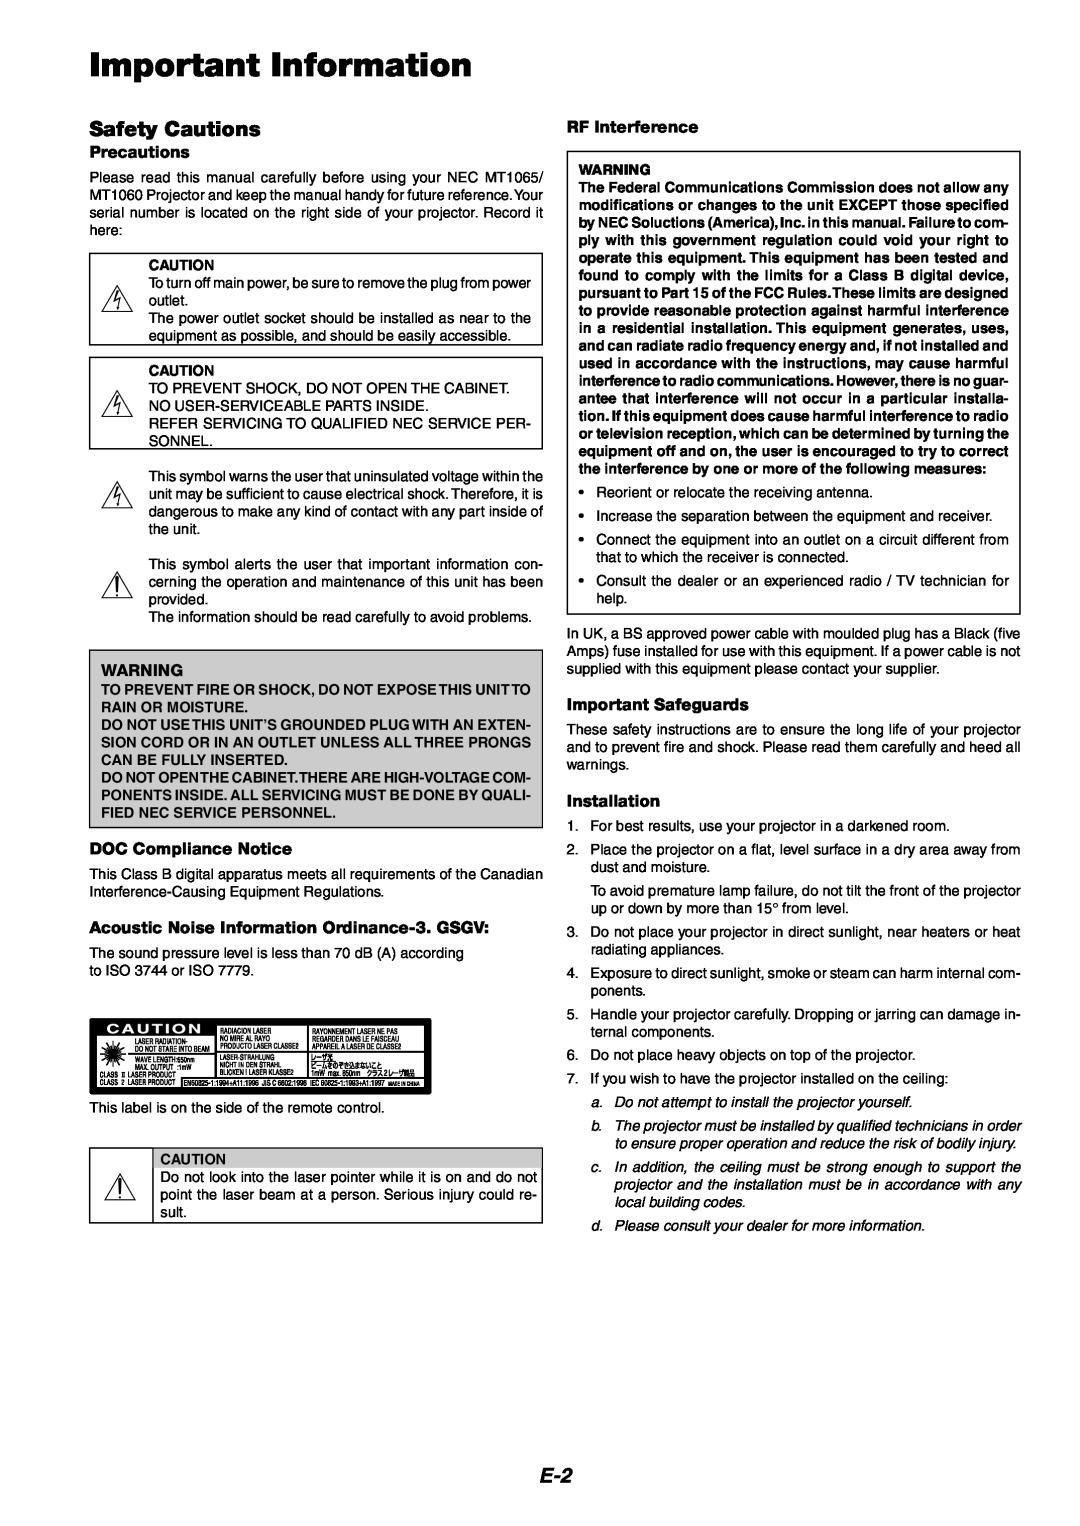 NEC MT1060 Important Information, Safety Cautions, Precautions, DOC Compliance Notice, RF Interference, Installation 